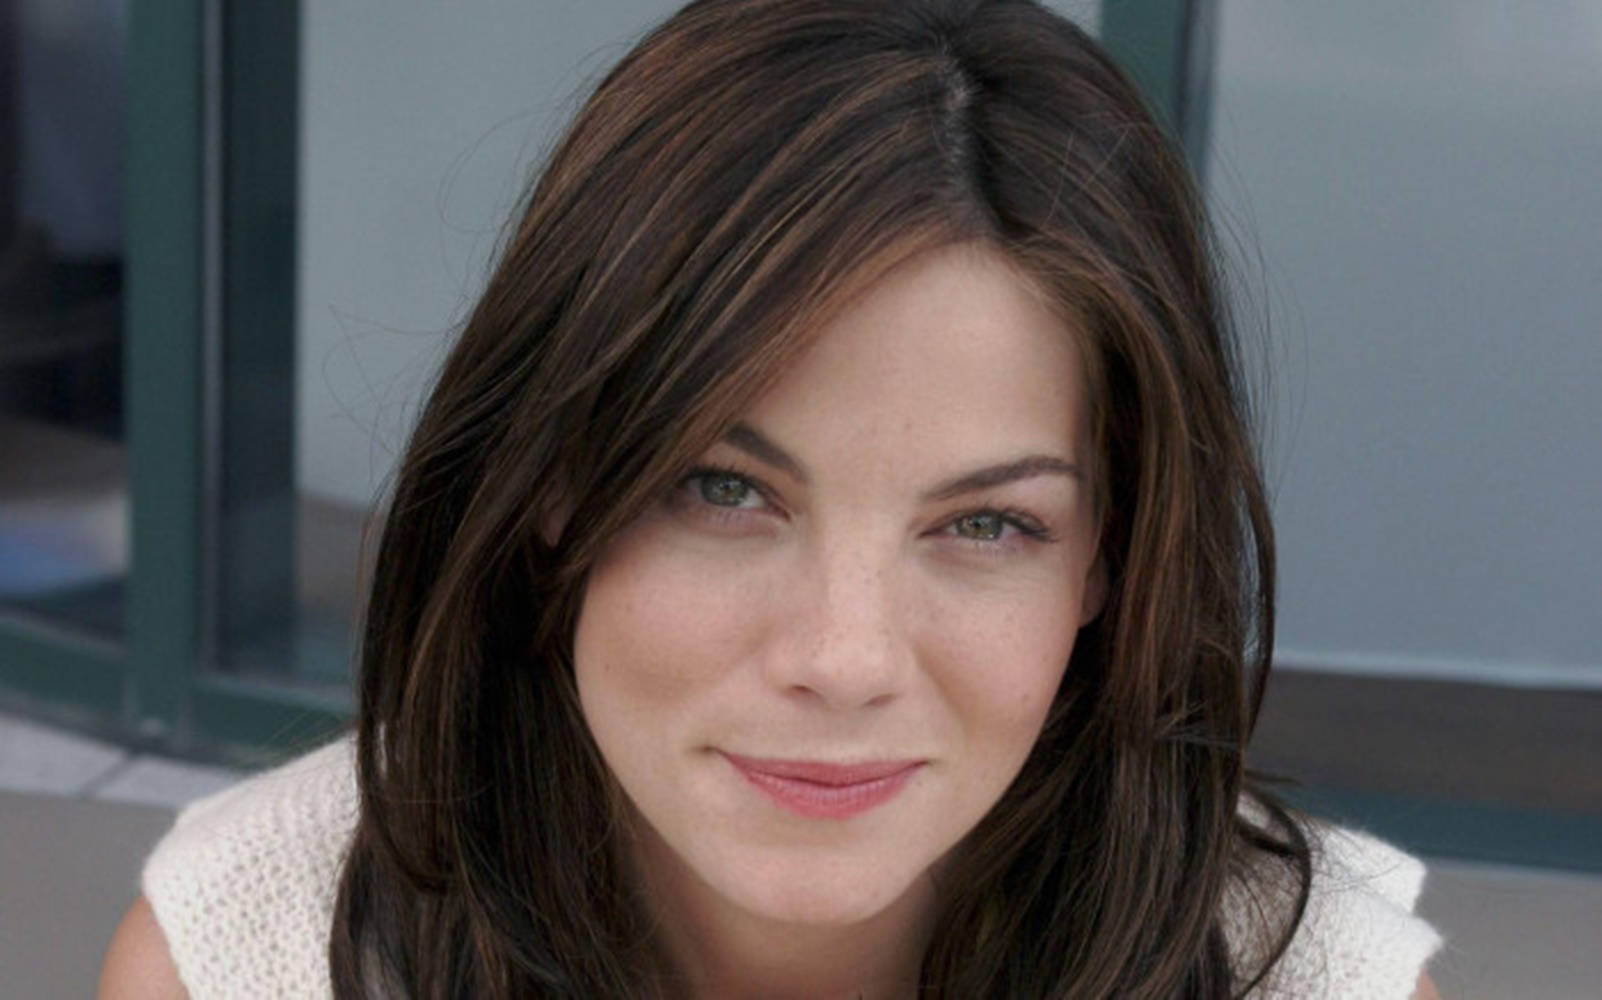 Captivating Smile of Michelle Monaghan Wallpaper